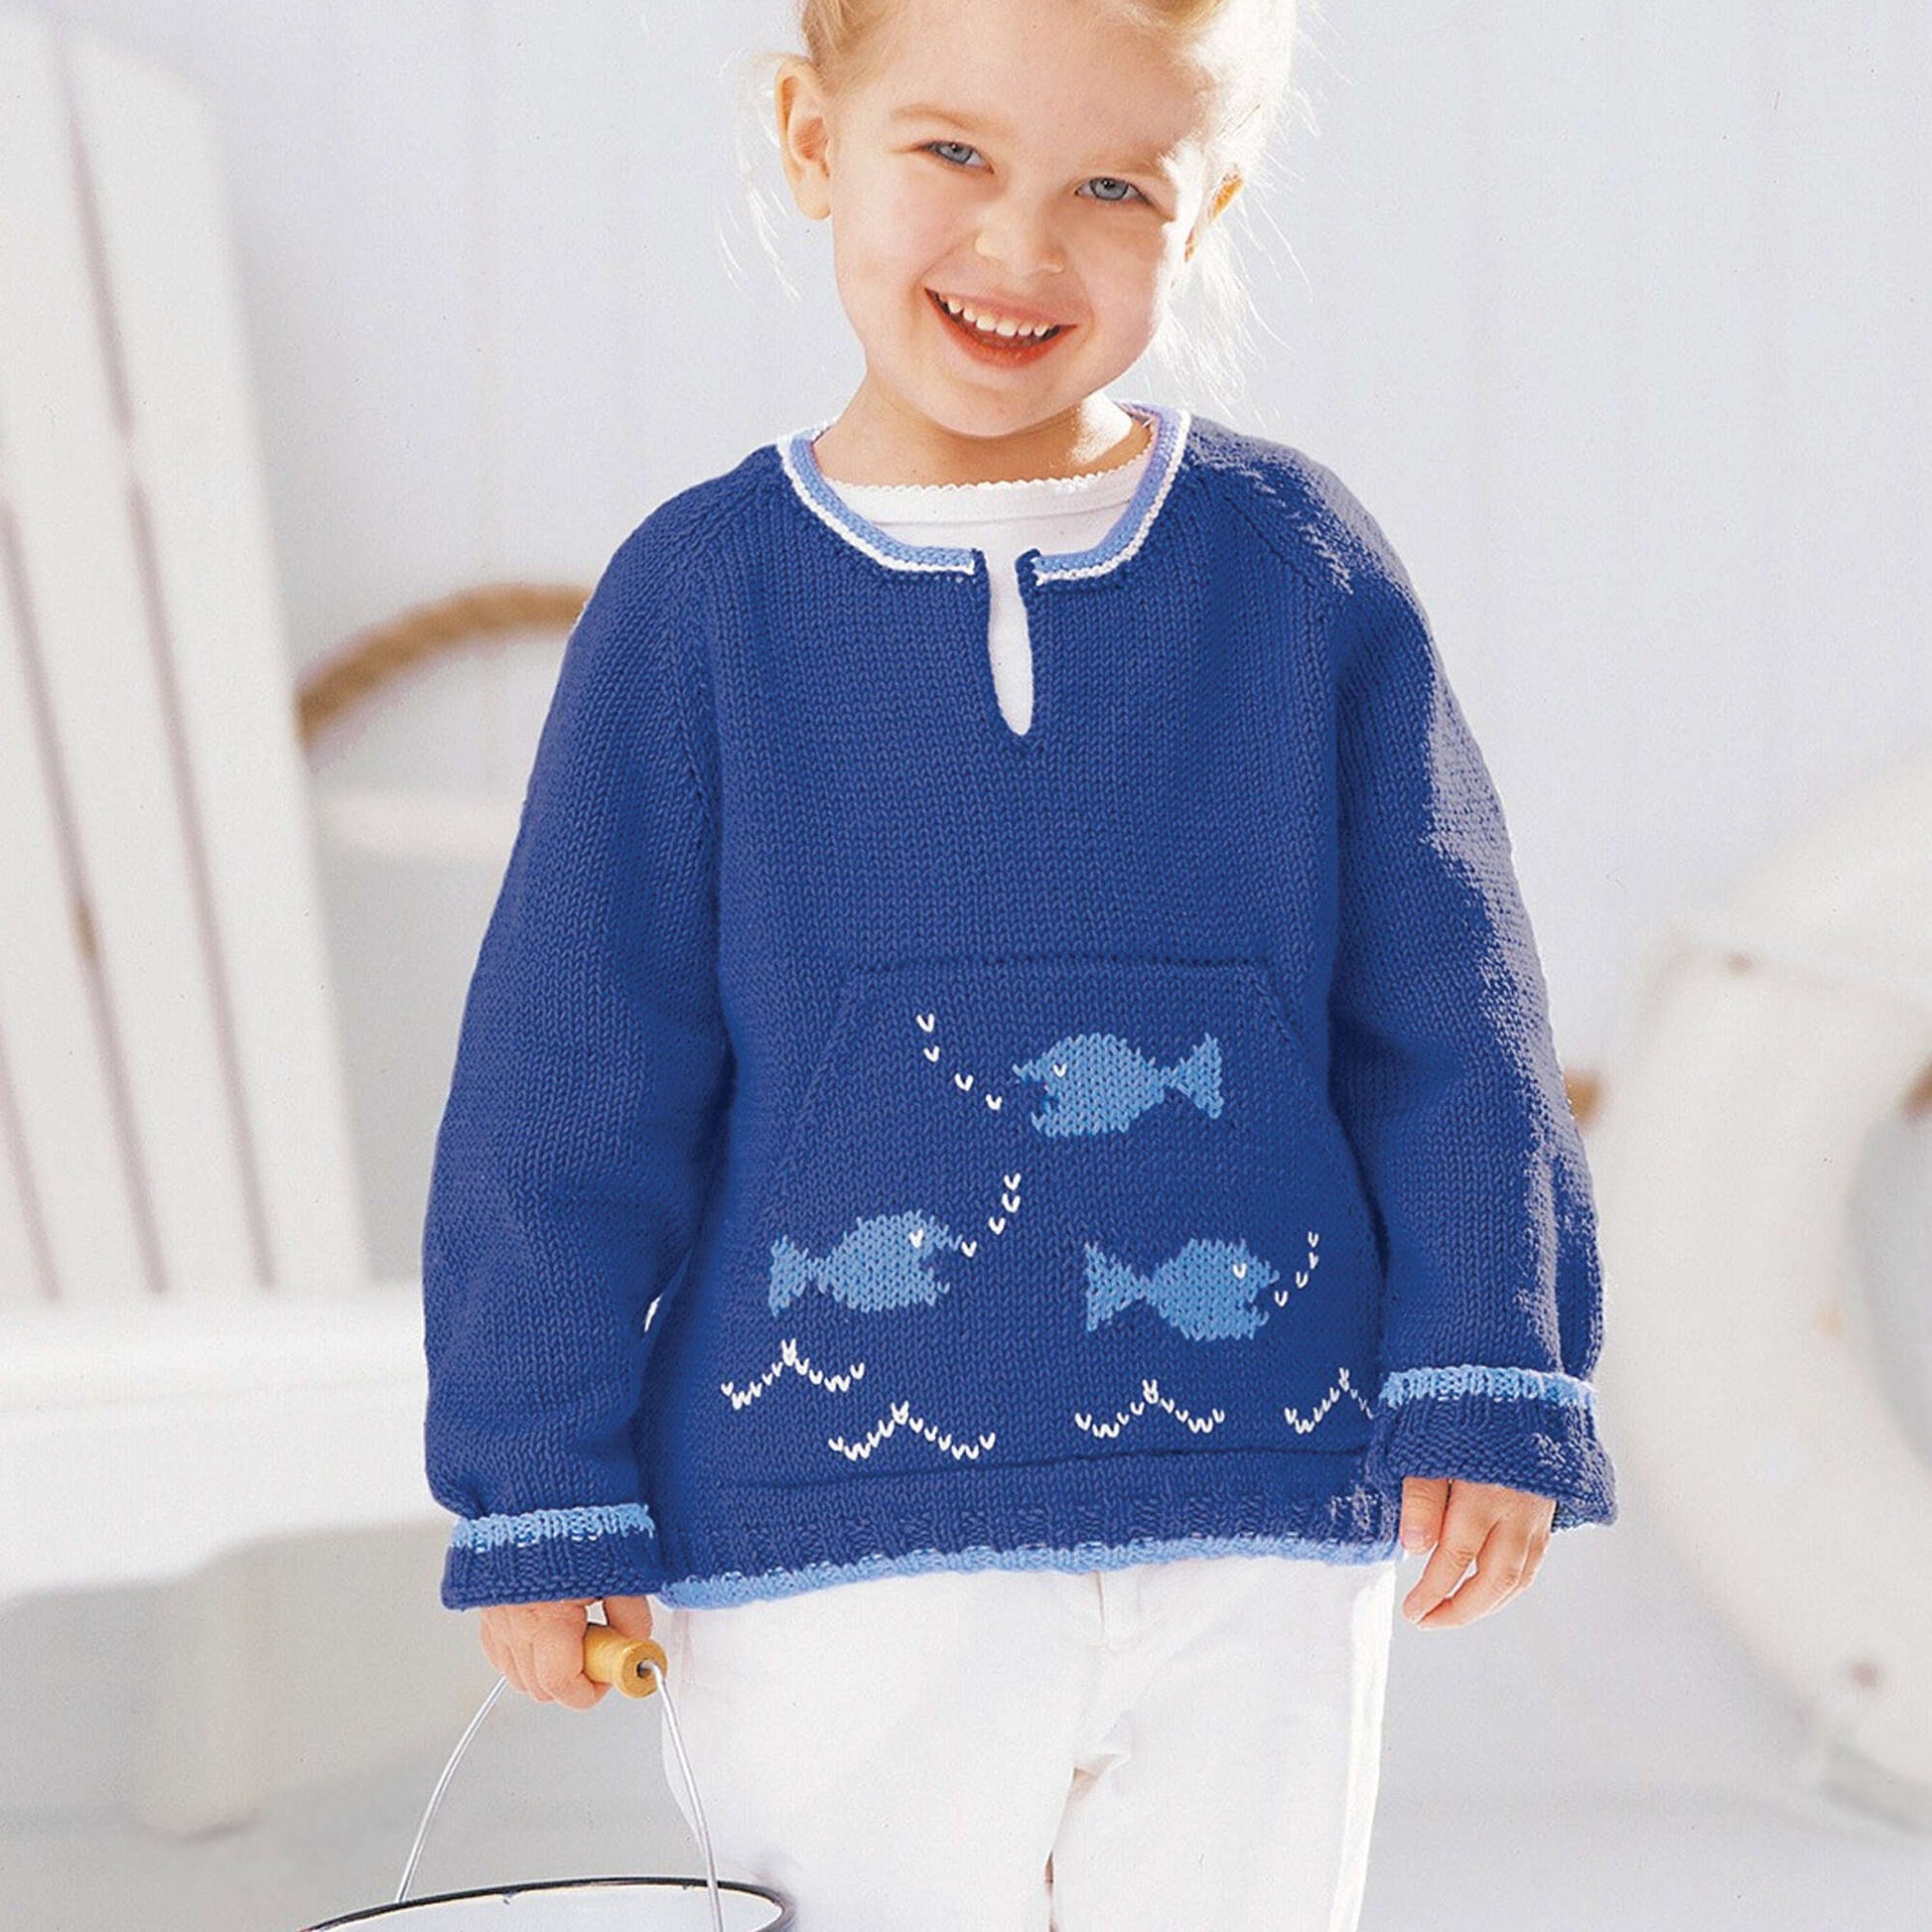 Free Patons From The Sea Pullovers Knit Pattern